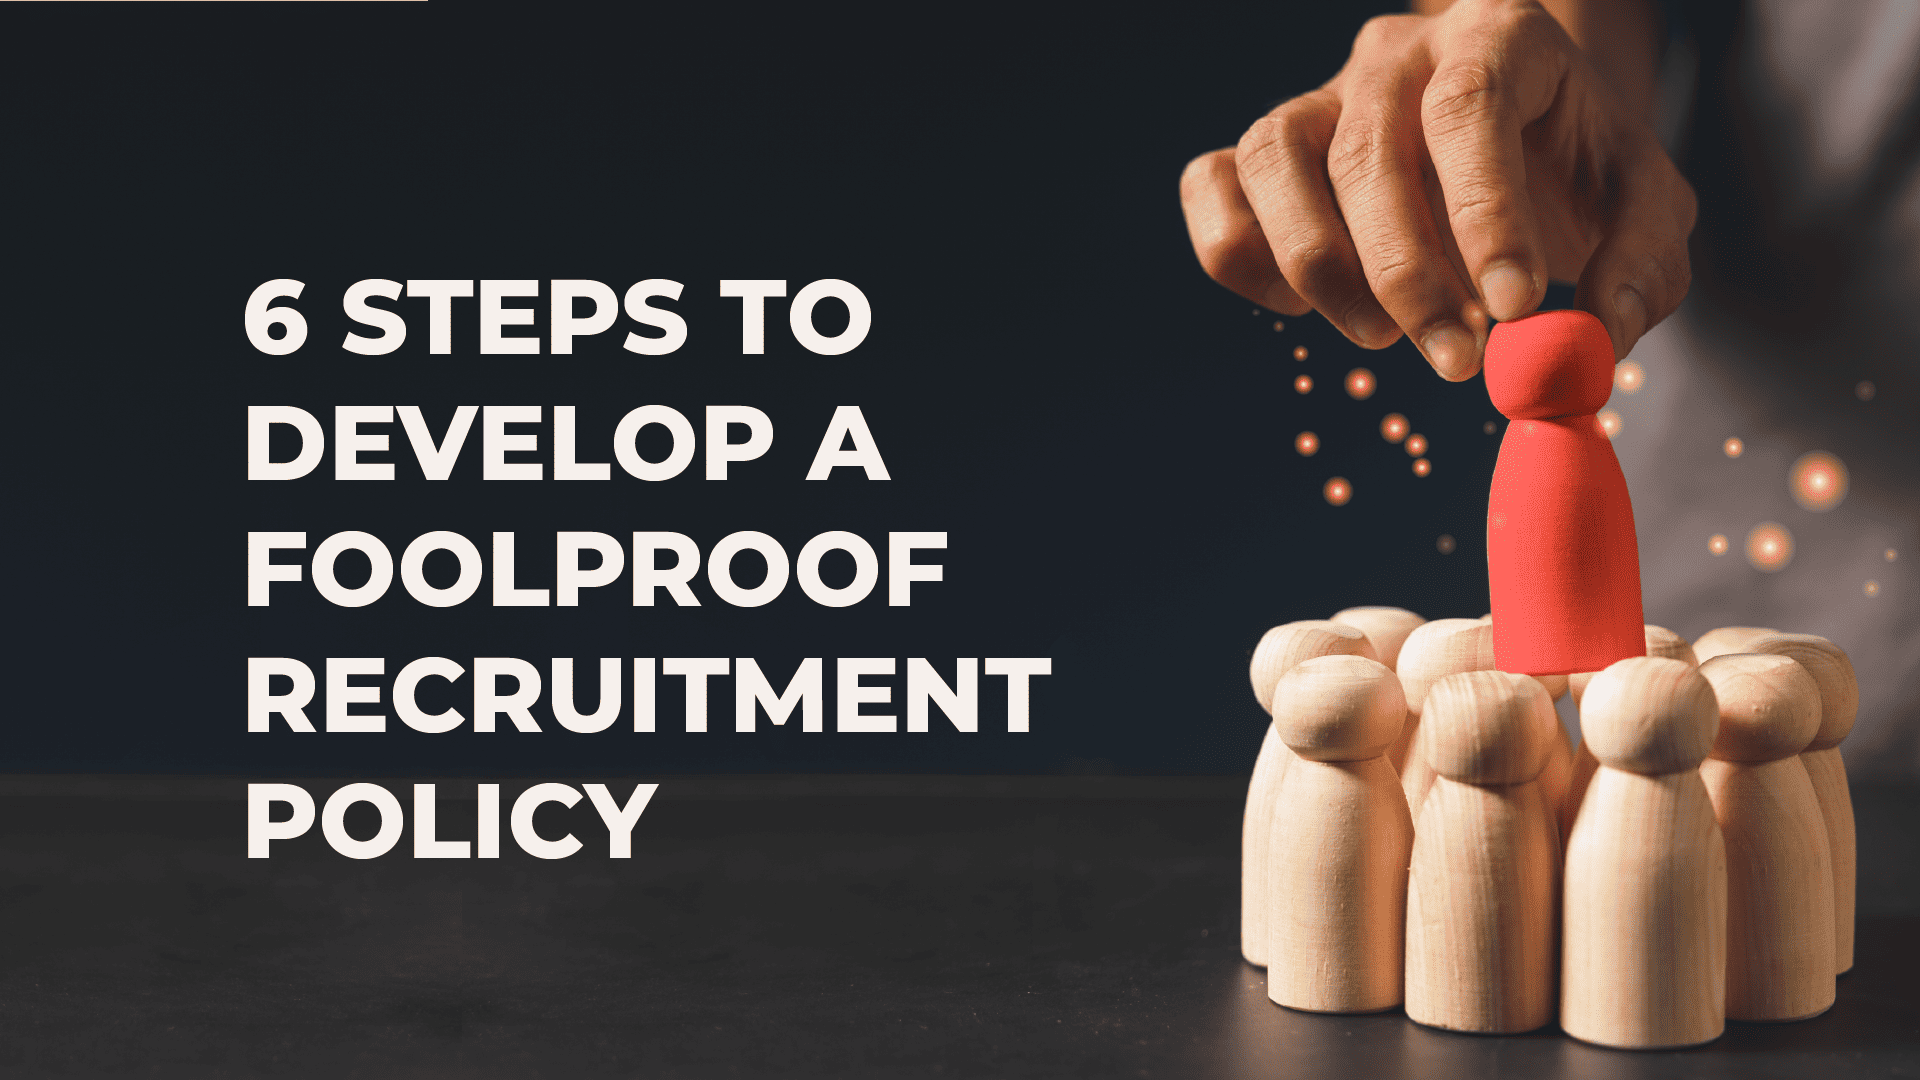 Developing a foolproof Recruitment Process